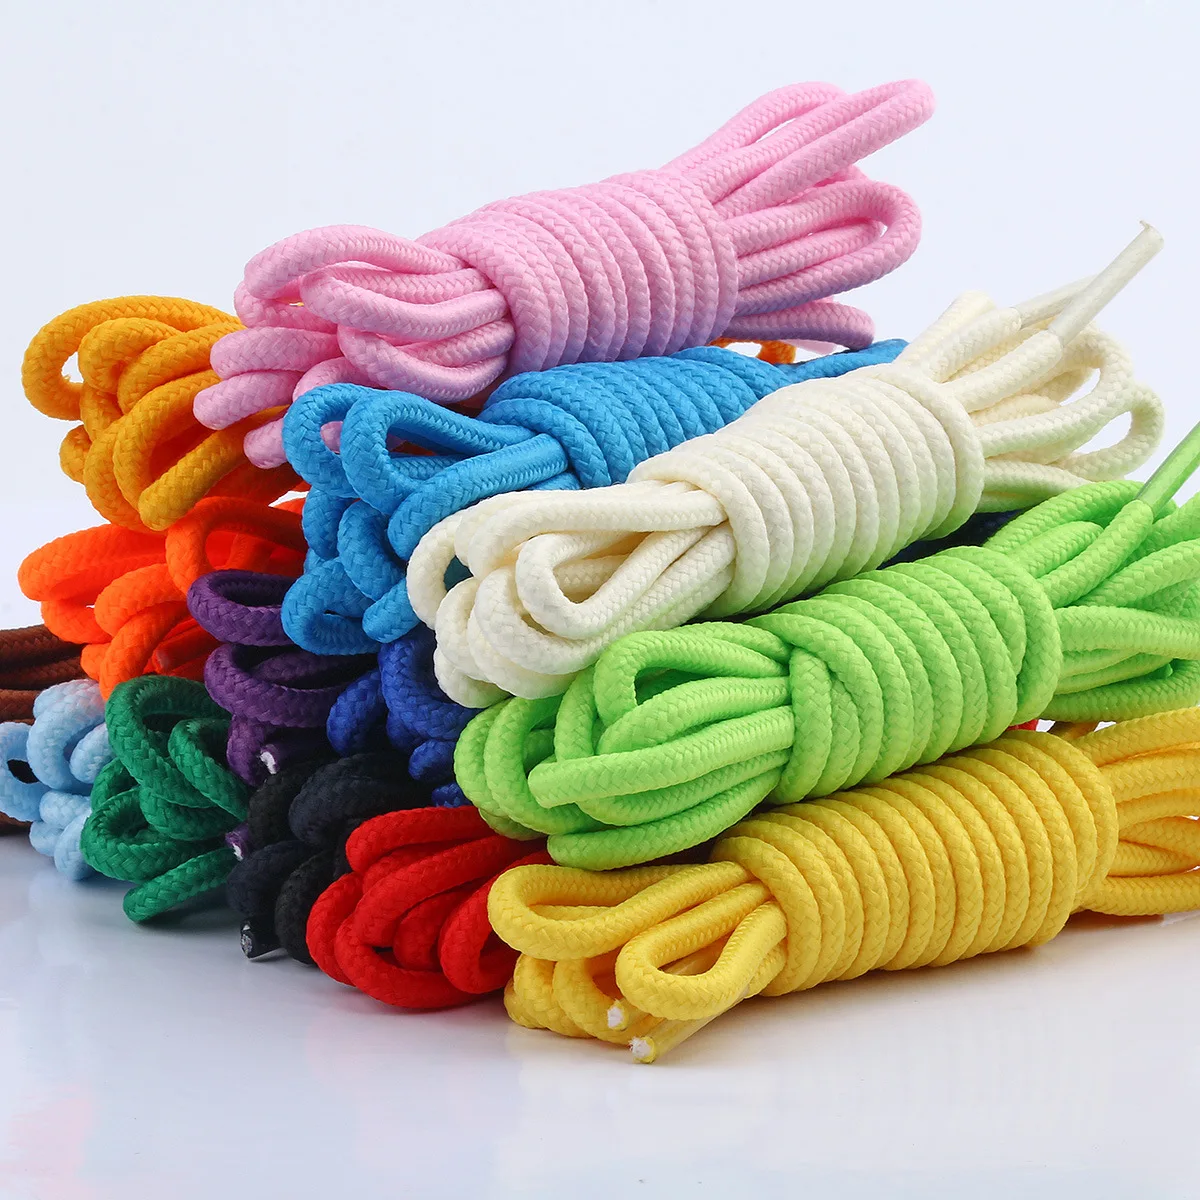 1 Pair Round Laces Running Sports Shoelaces Fashion Colorful Sneakers Shoestrings Casual Shoe Laces Unisex Shoelace 80/100/120CM